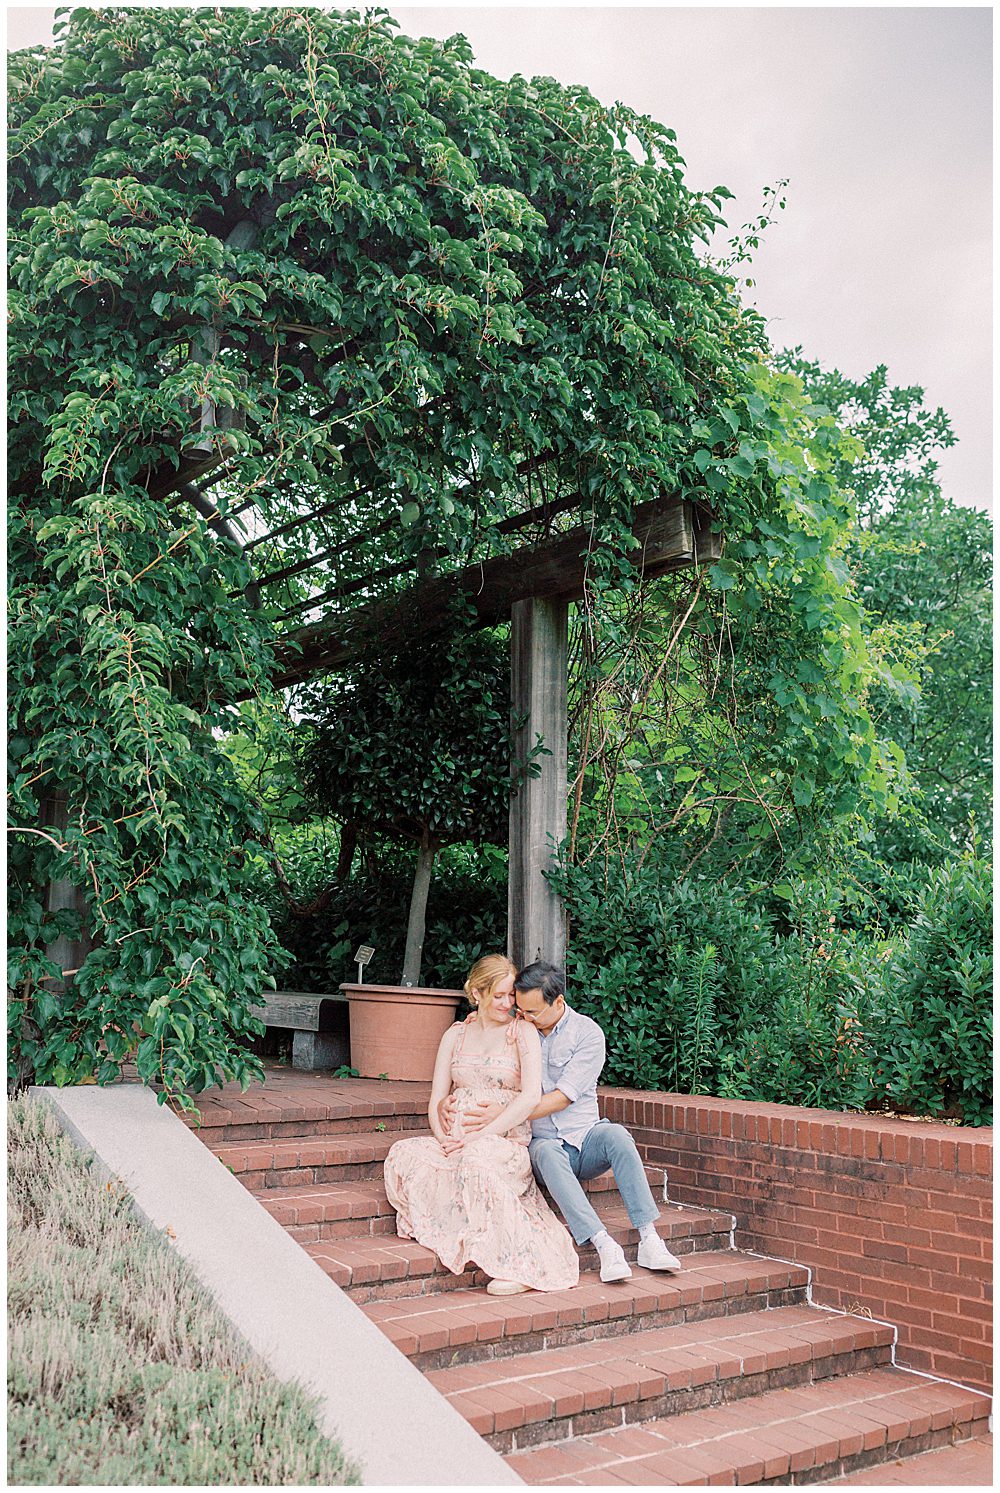 Husband and wife sit on brick steps underneath pergola at the National Arboretum during maternity session.